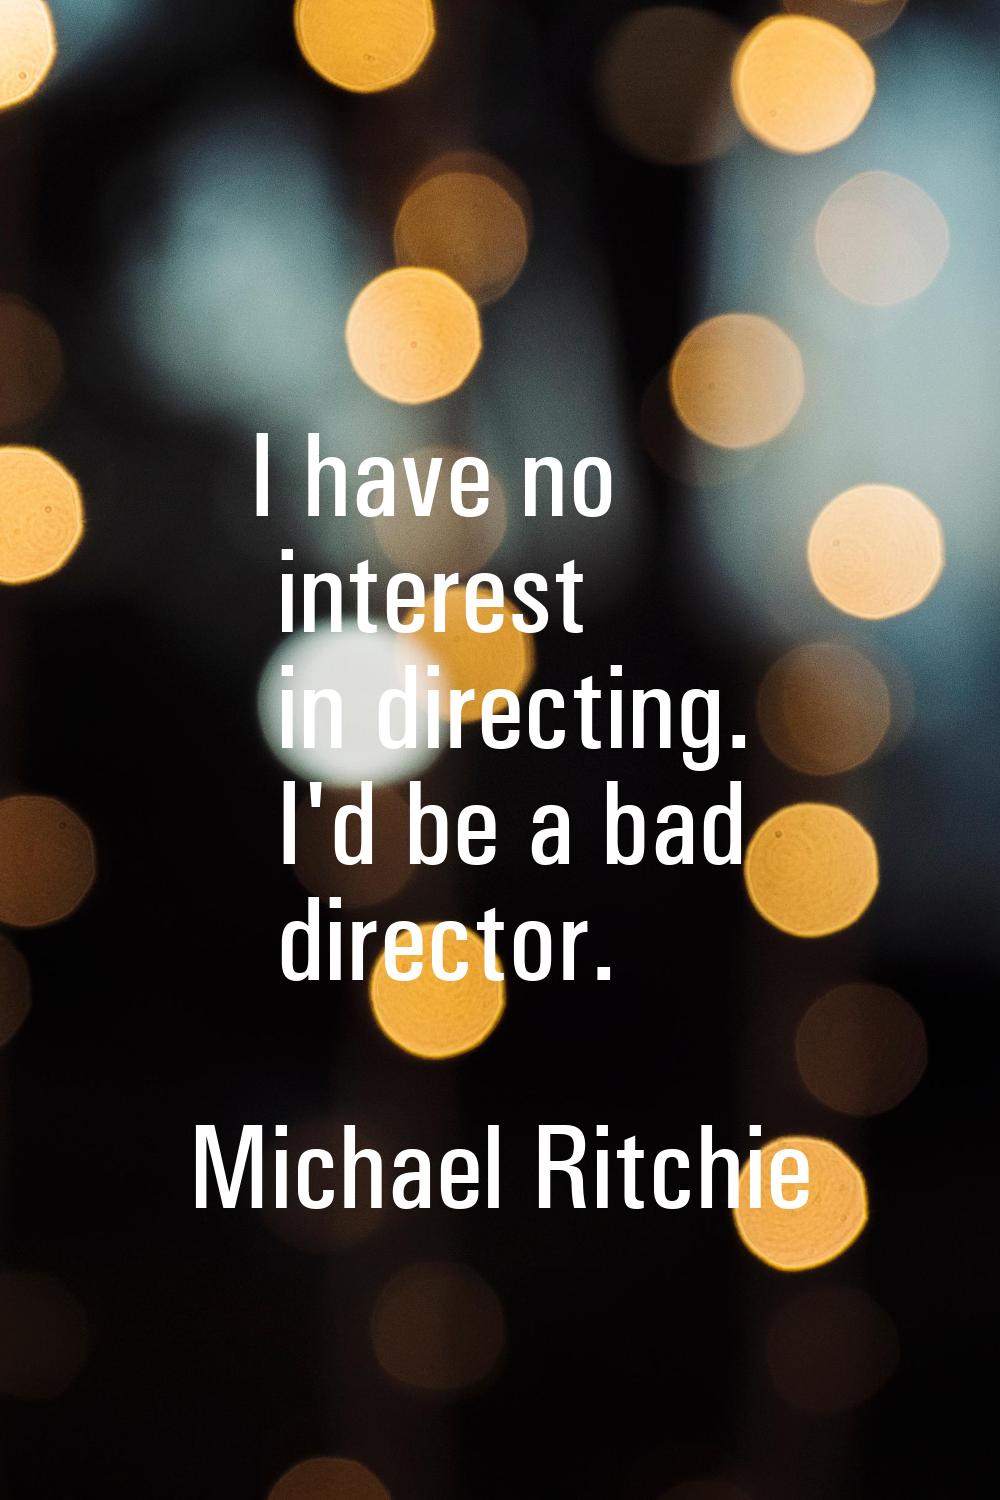 I have no interest in directing. I'd be a bad director.